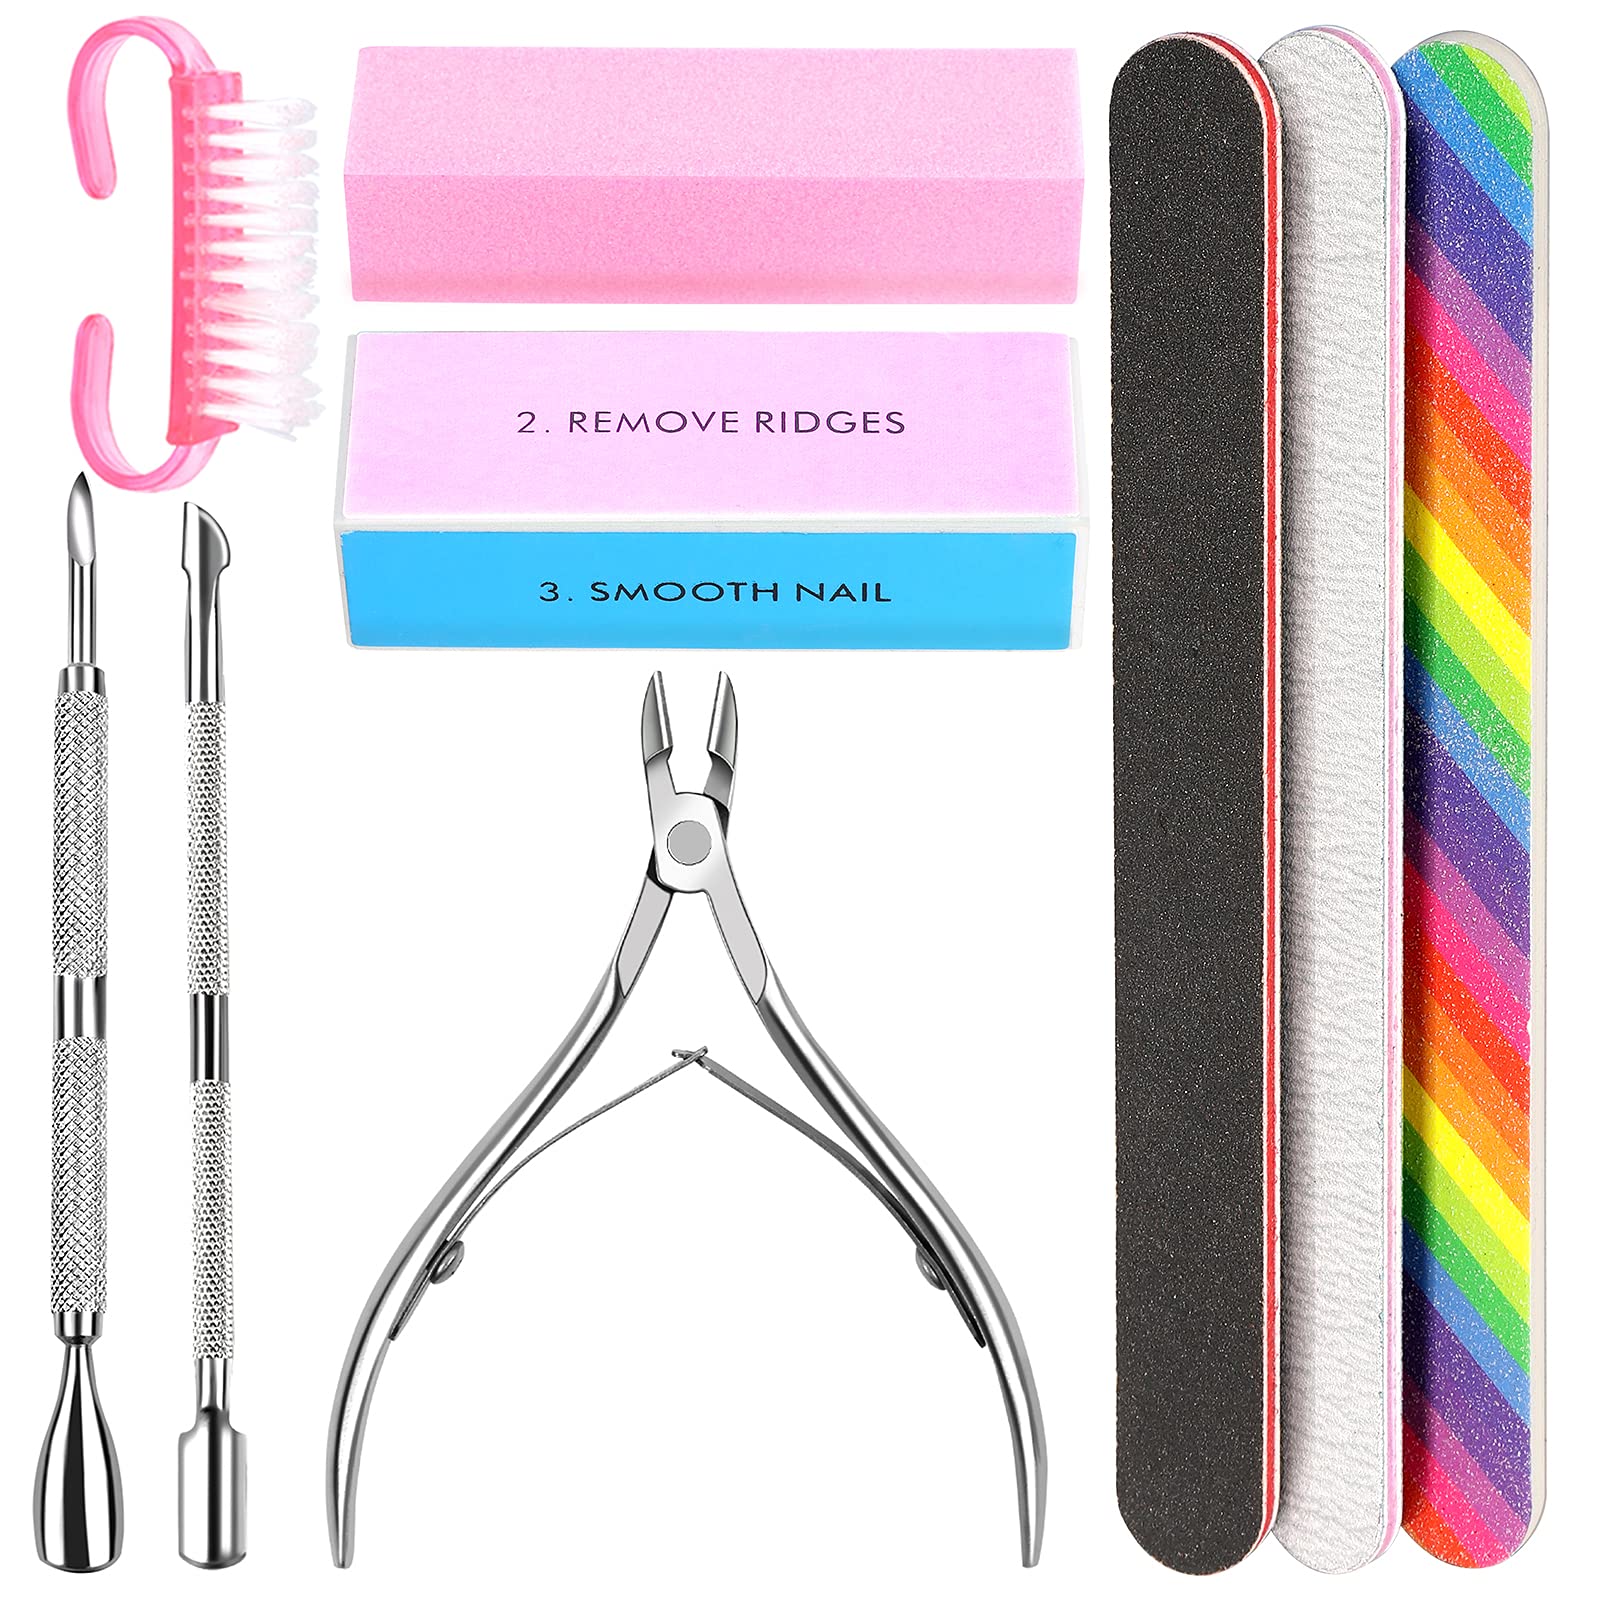 Nail File Set- 3pcs Double Sided Nail File, Rectangular Nail Buffer, Buffer Block Sponge Polished, Nail Brush, Come with Cuticle Nipper and Pusher, Perfect Manicure Tool Kit for Shiny Nail